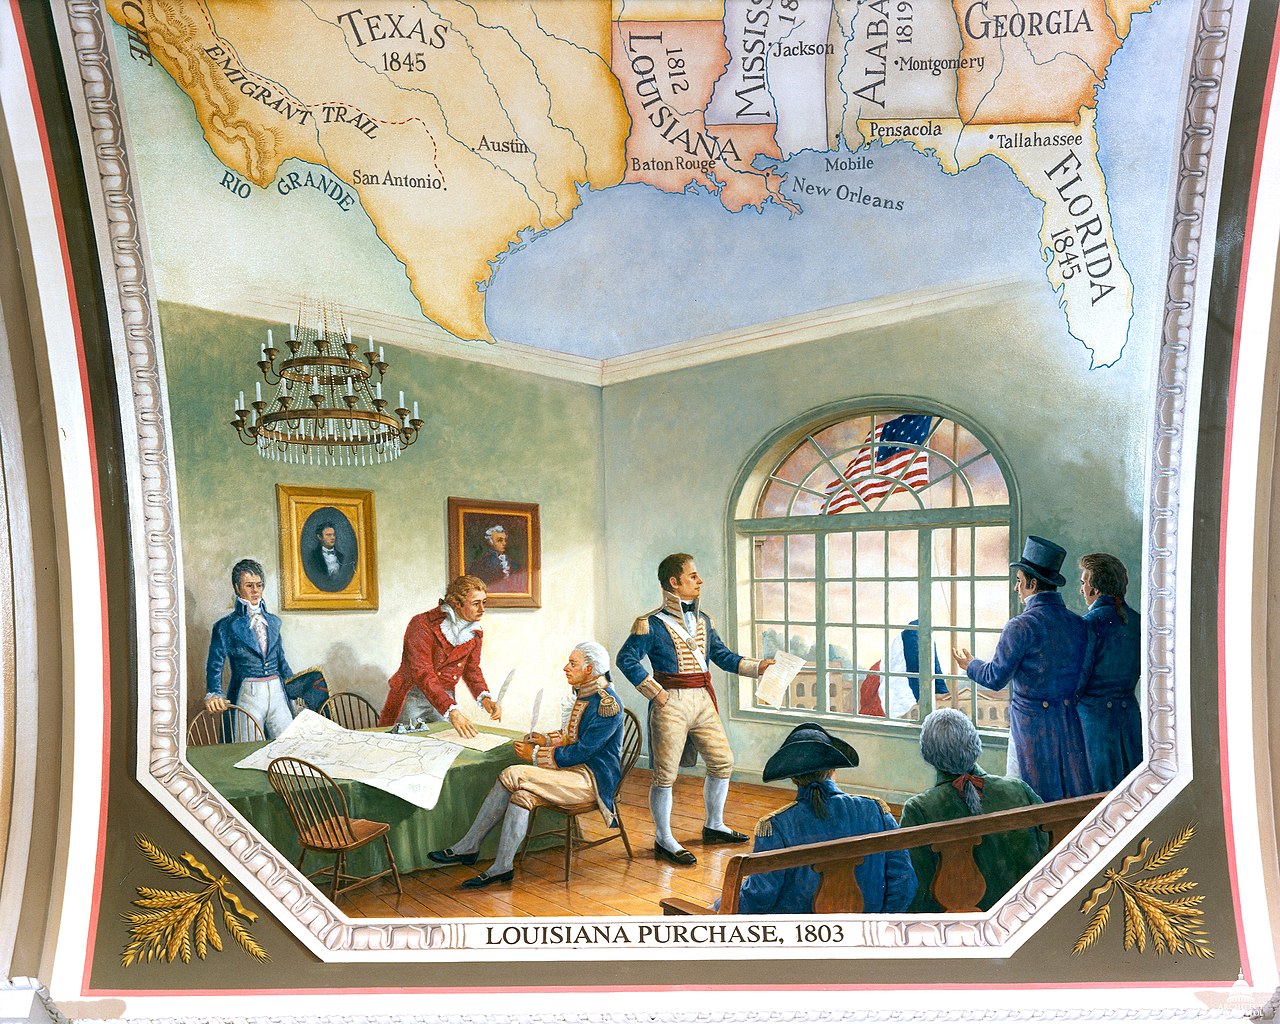 File:Flickr - USCapitol - Louisiana Purchase, www.bagssaleusa.com - Wikimedia Commons